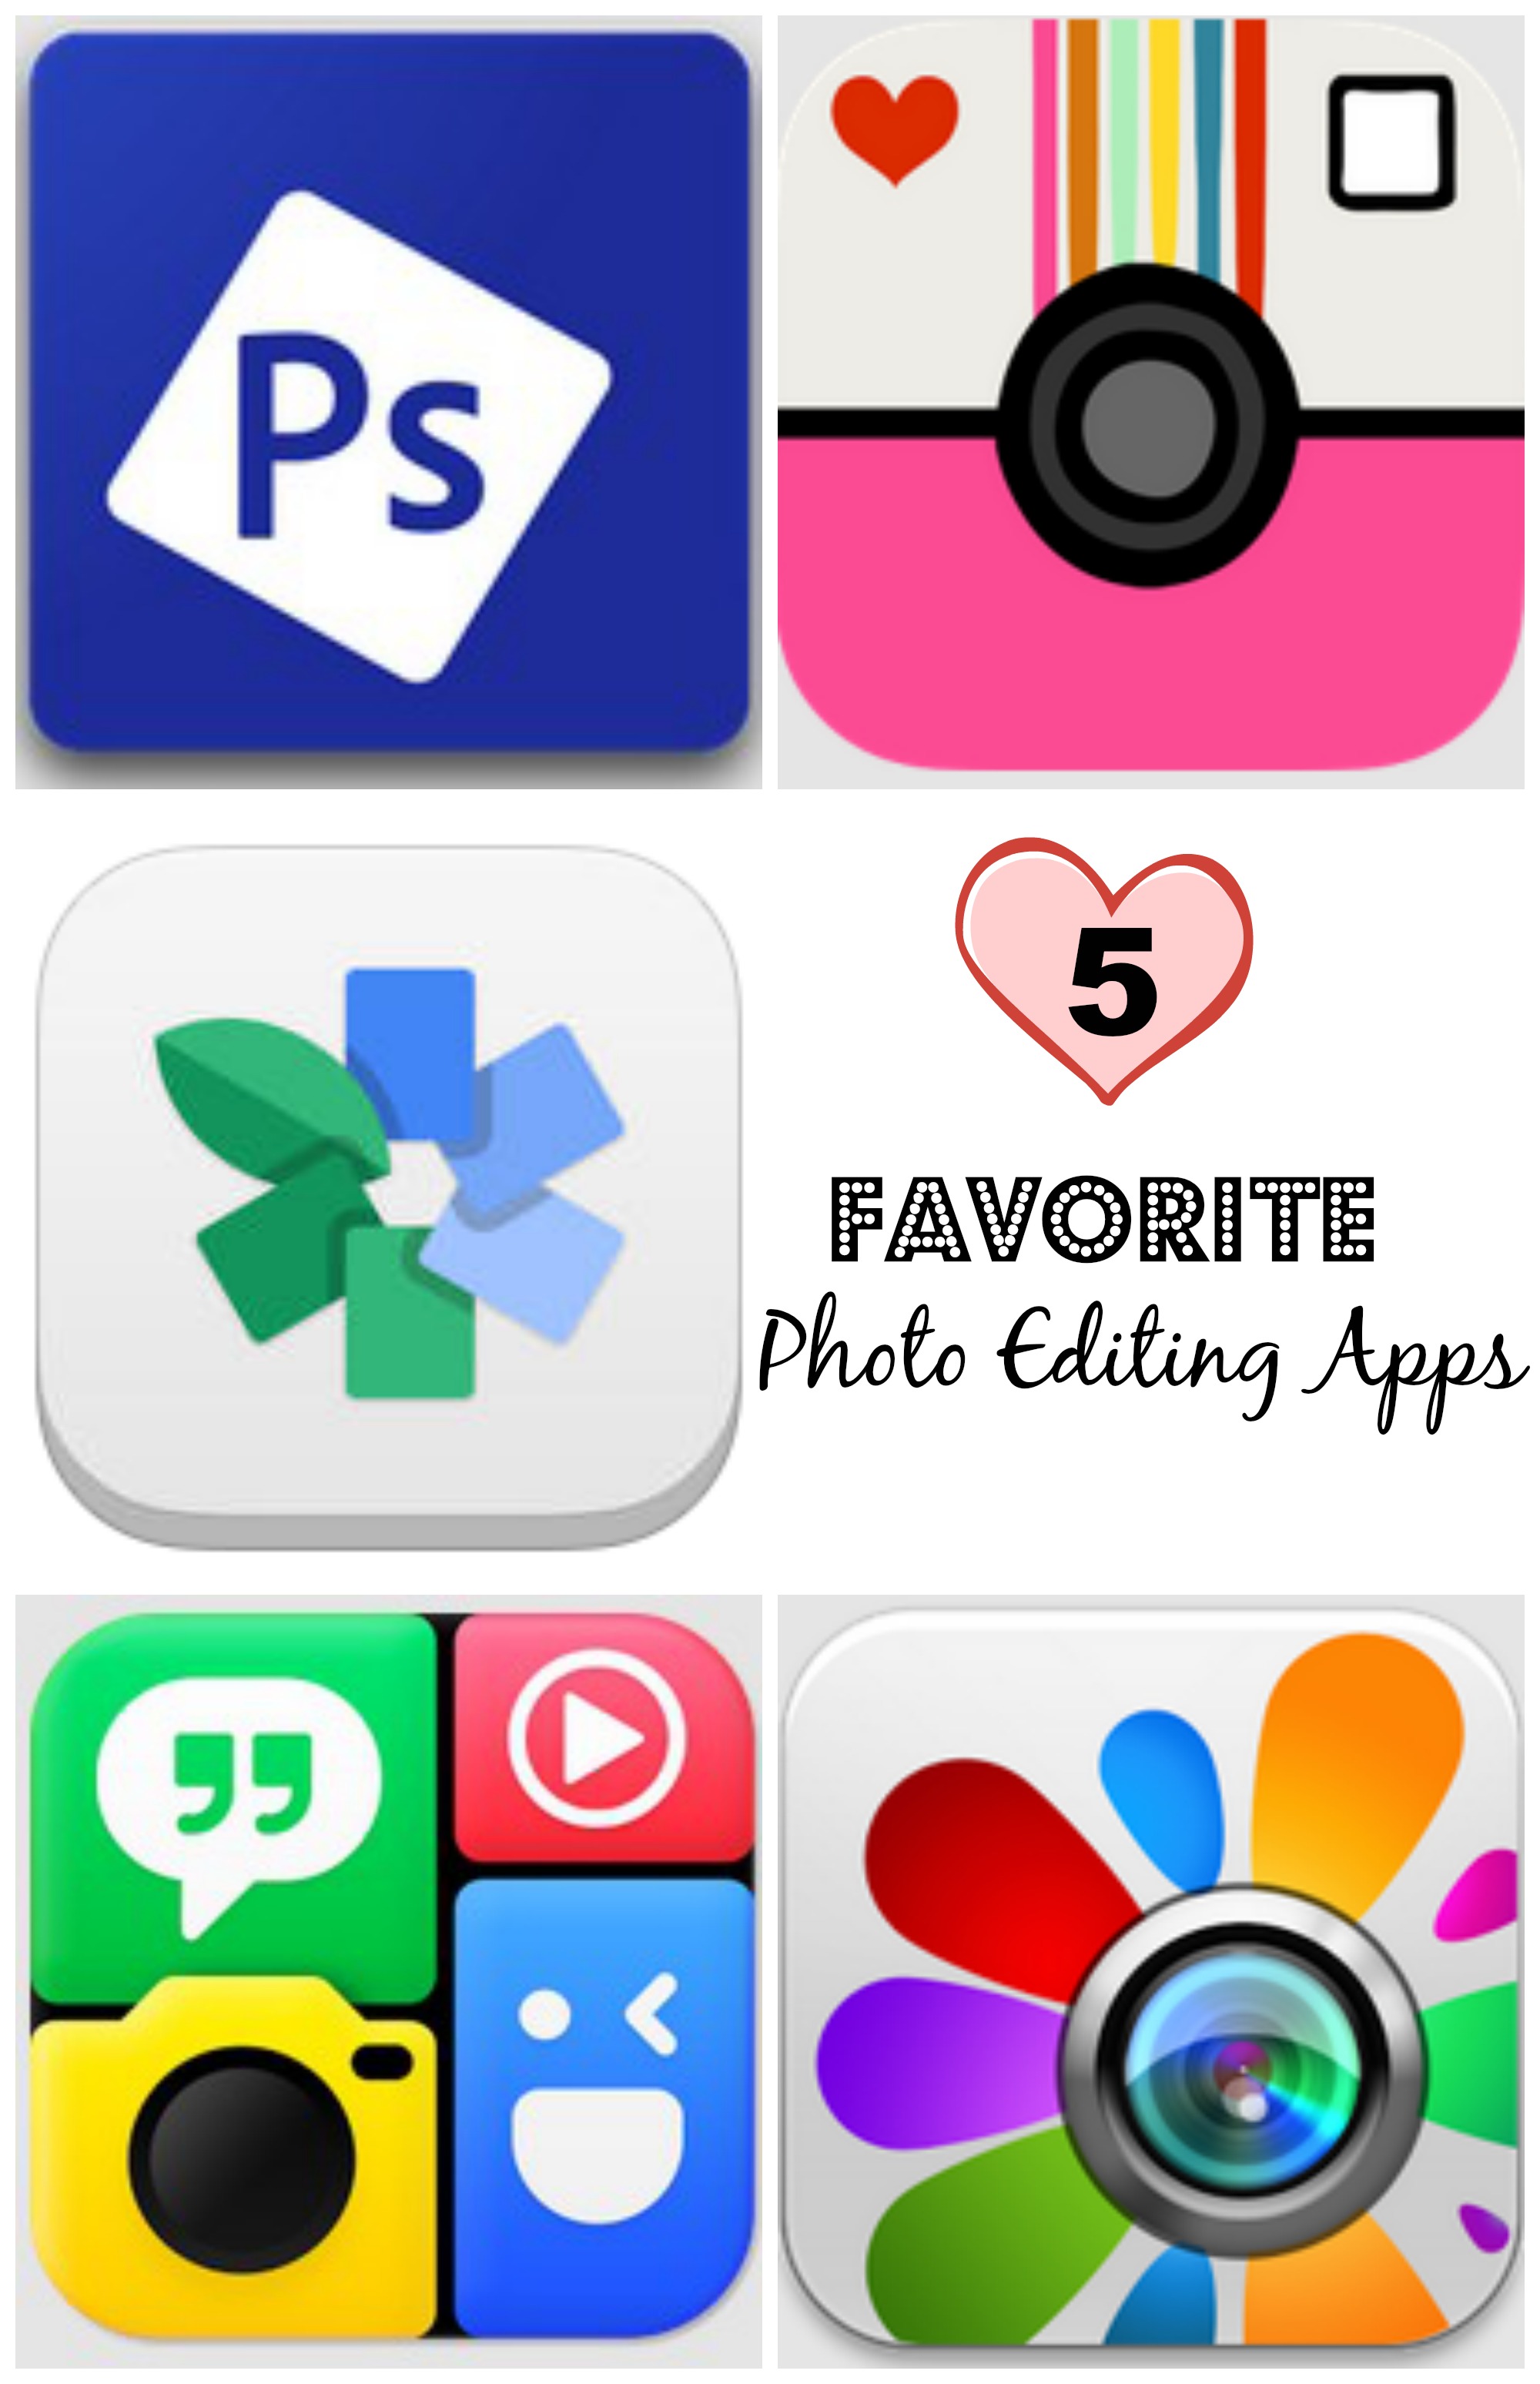 video editing apps